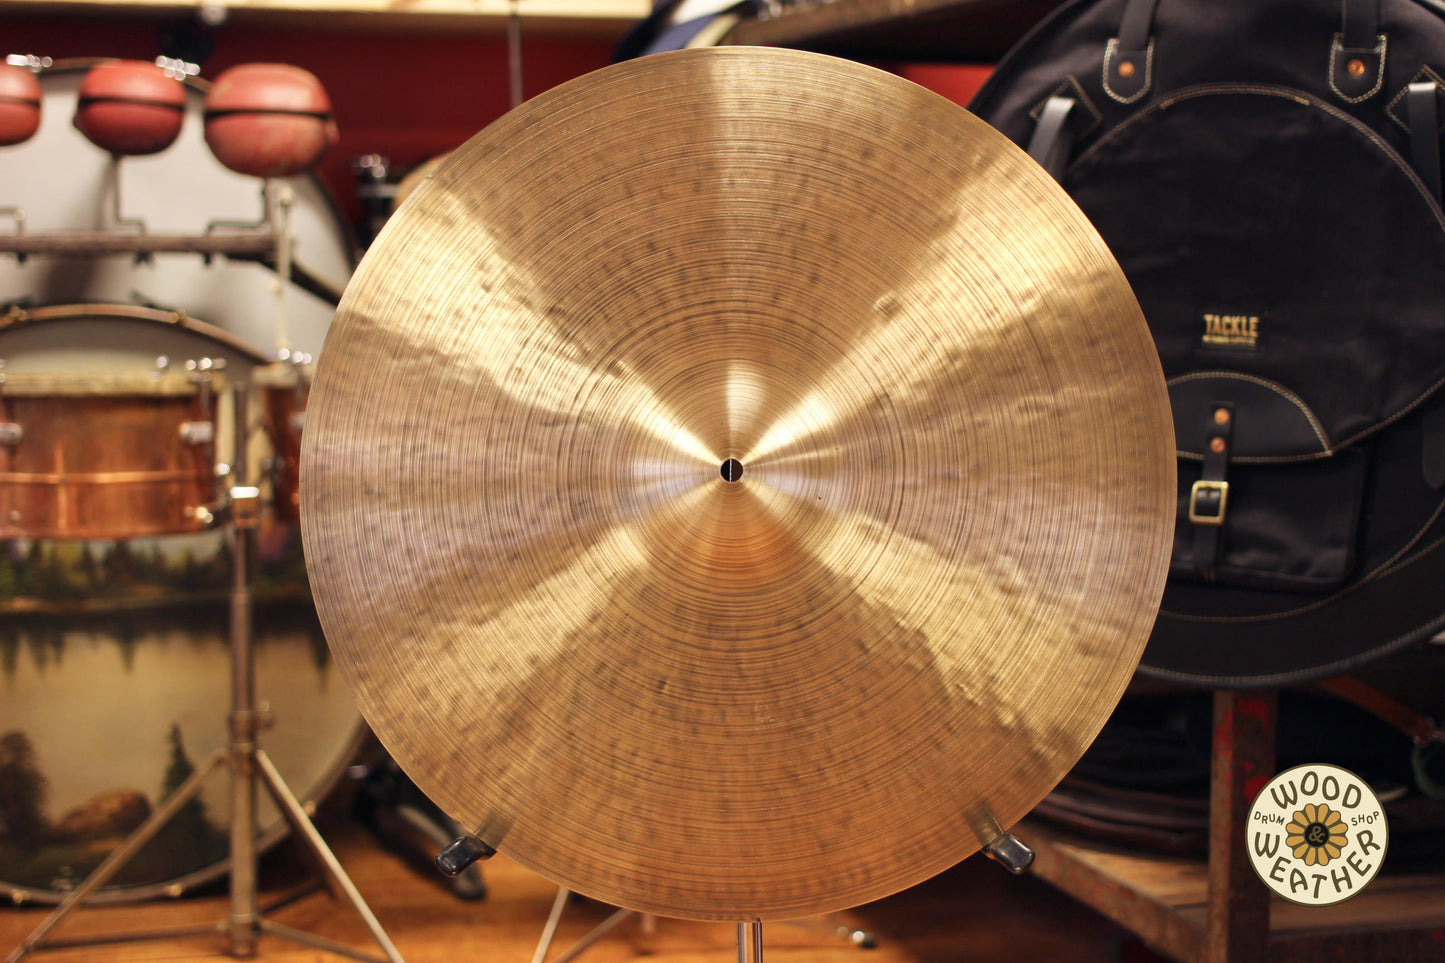 Cymbal & Gong 20" Holy Grail Ride Cymbal 1761g